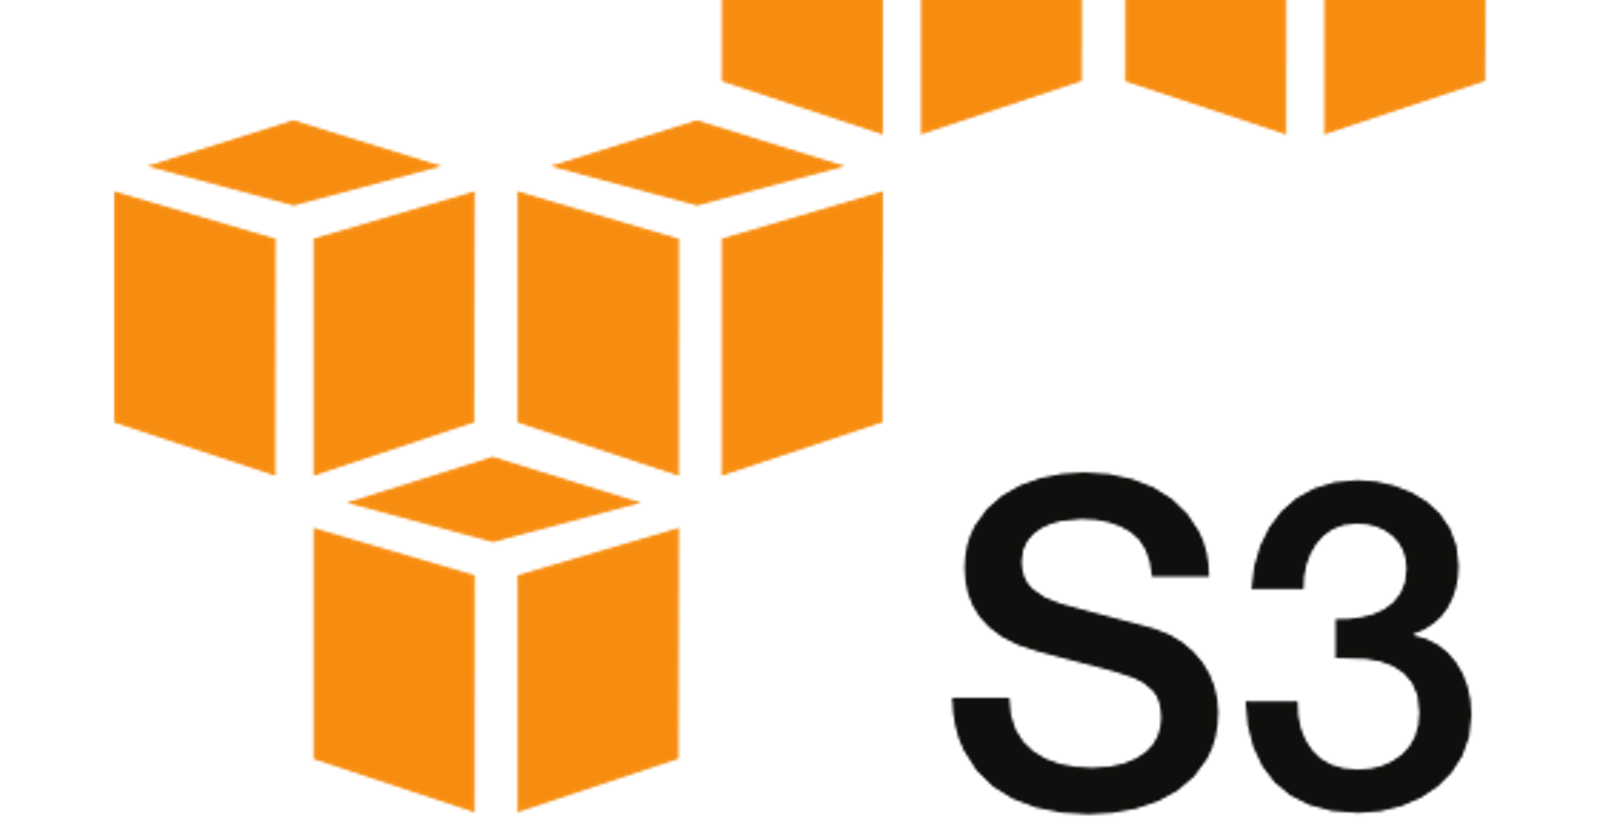 The Simple Storage Service: AWS's Superpower for Storage